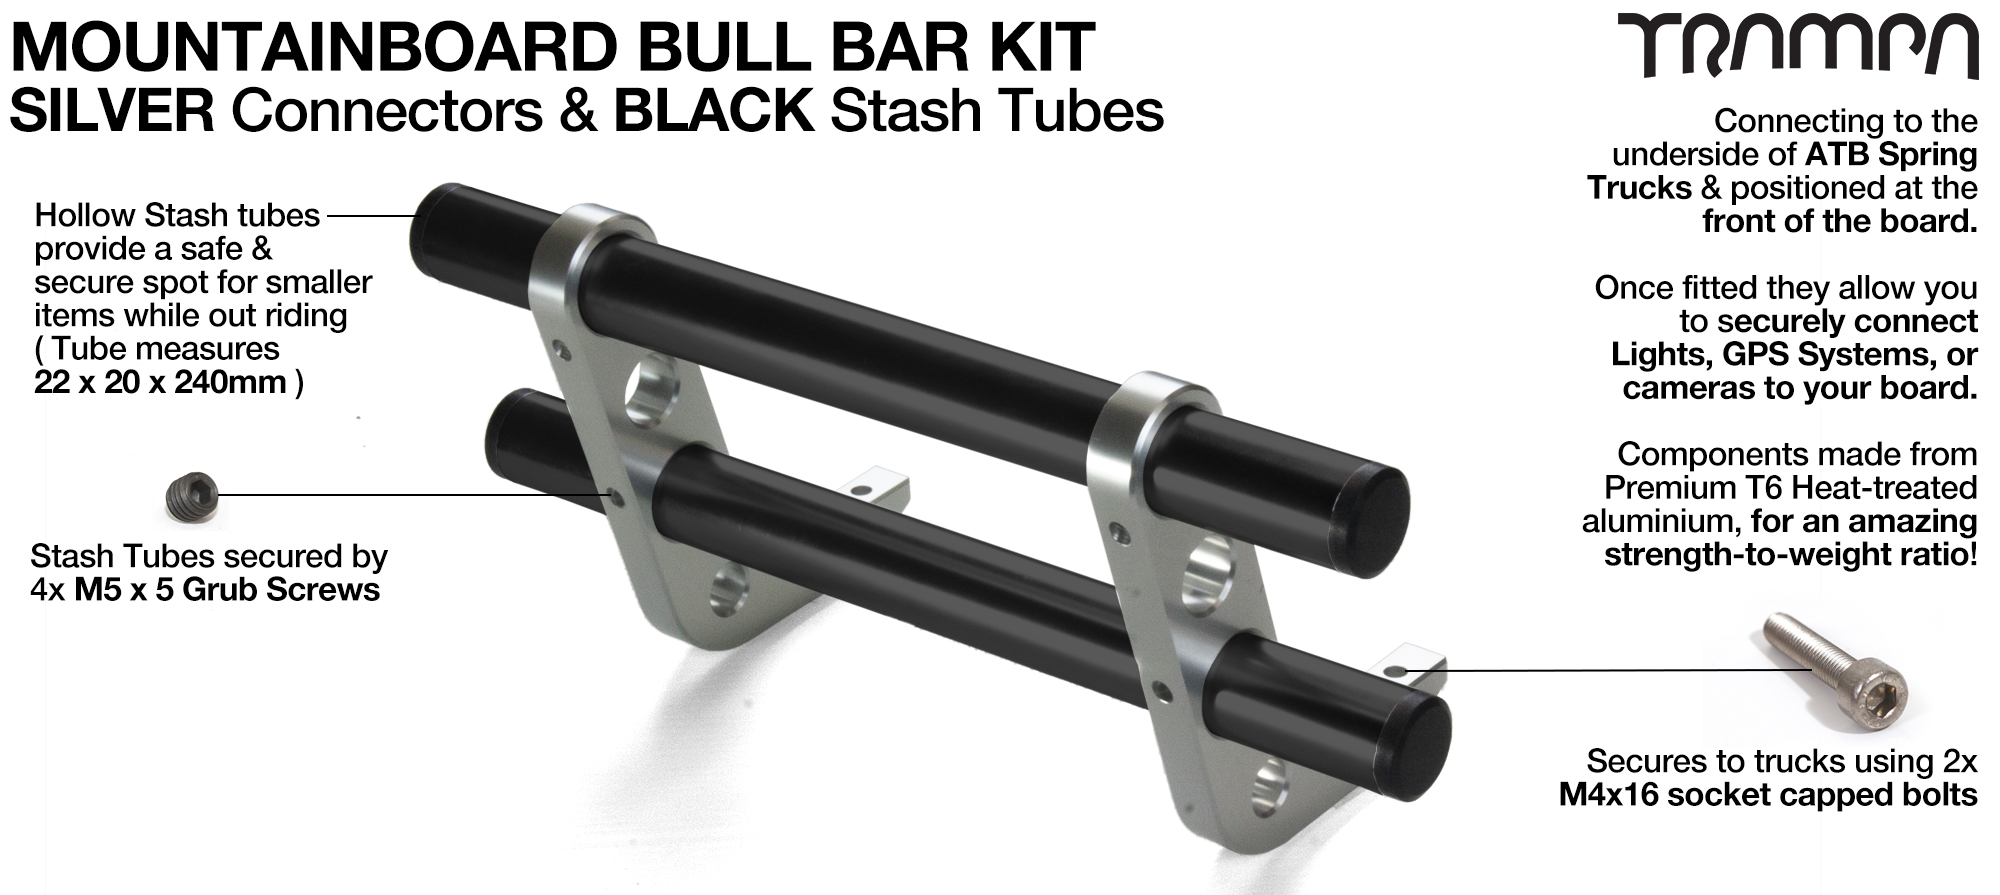 SILVER Uprights & BLACK Crossbar BULL BARS for MOUNTAINBOARDS T6 Heat Treated CNC'd Aluminium Uprights, with Hollow Aluminium Stash Tubes with Rubber end bungs 